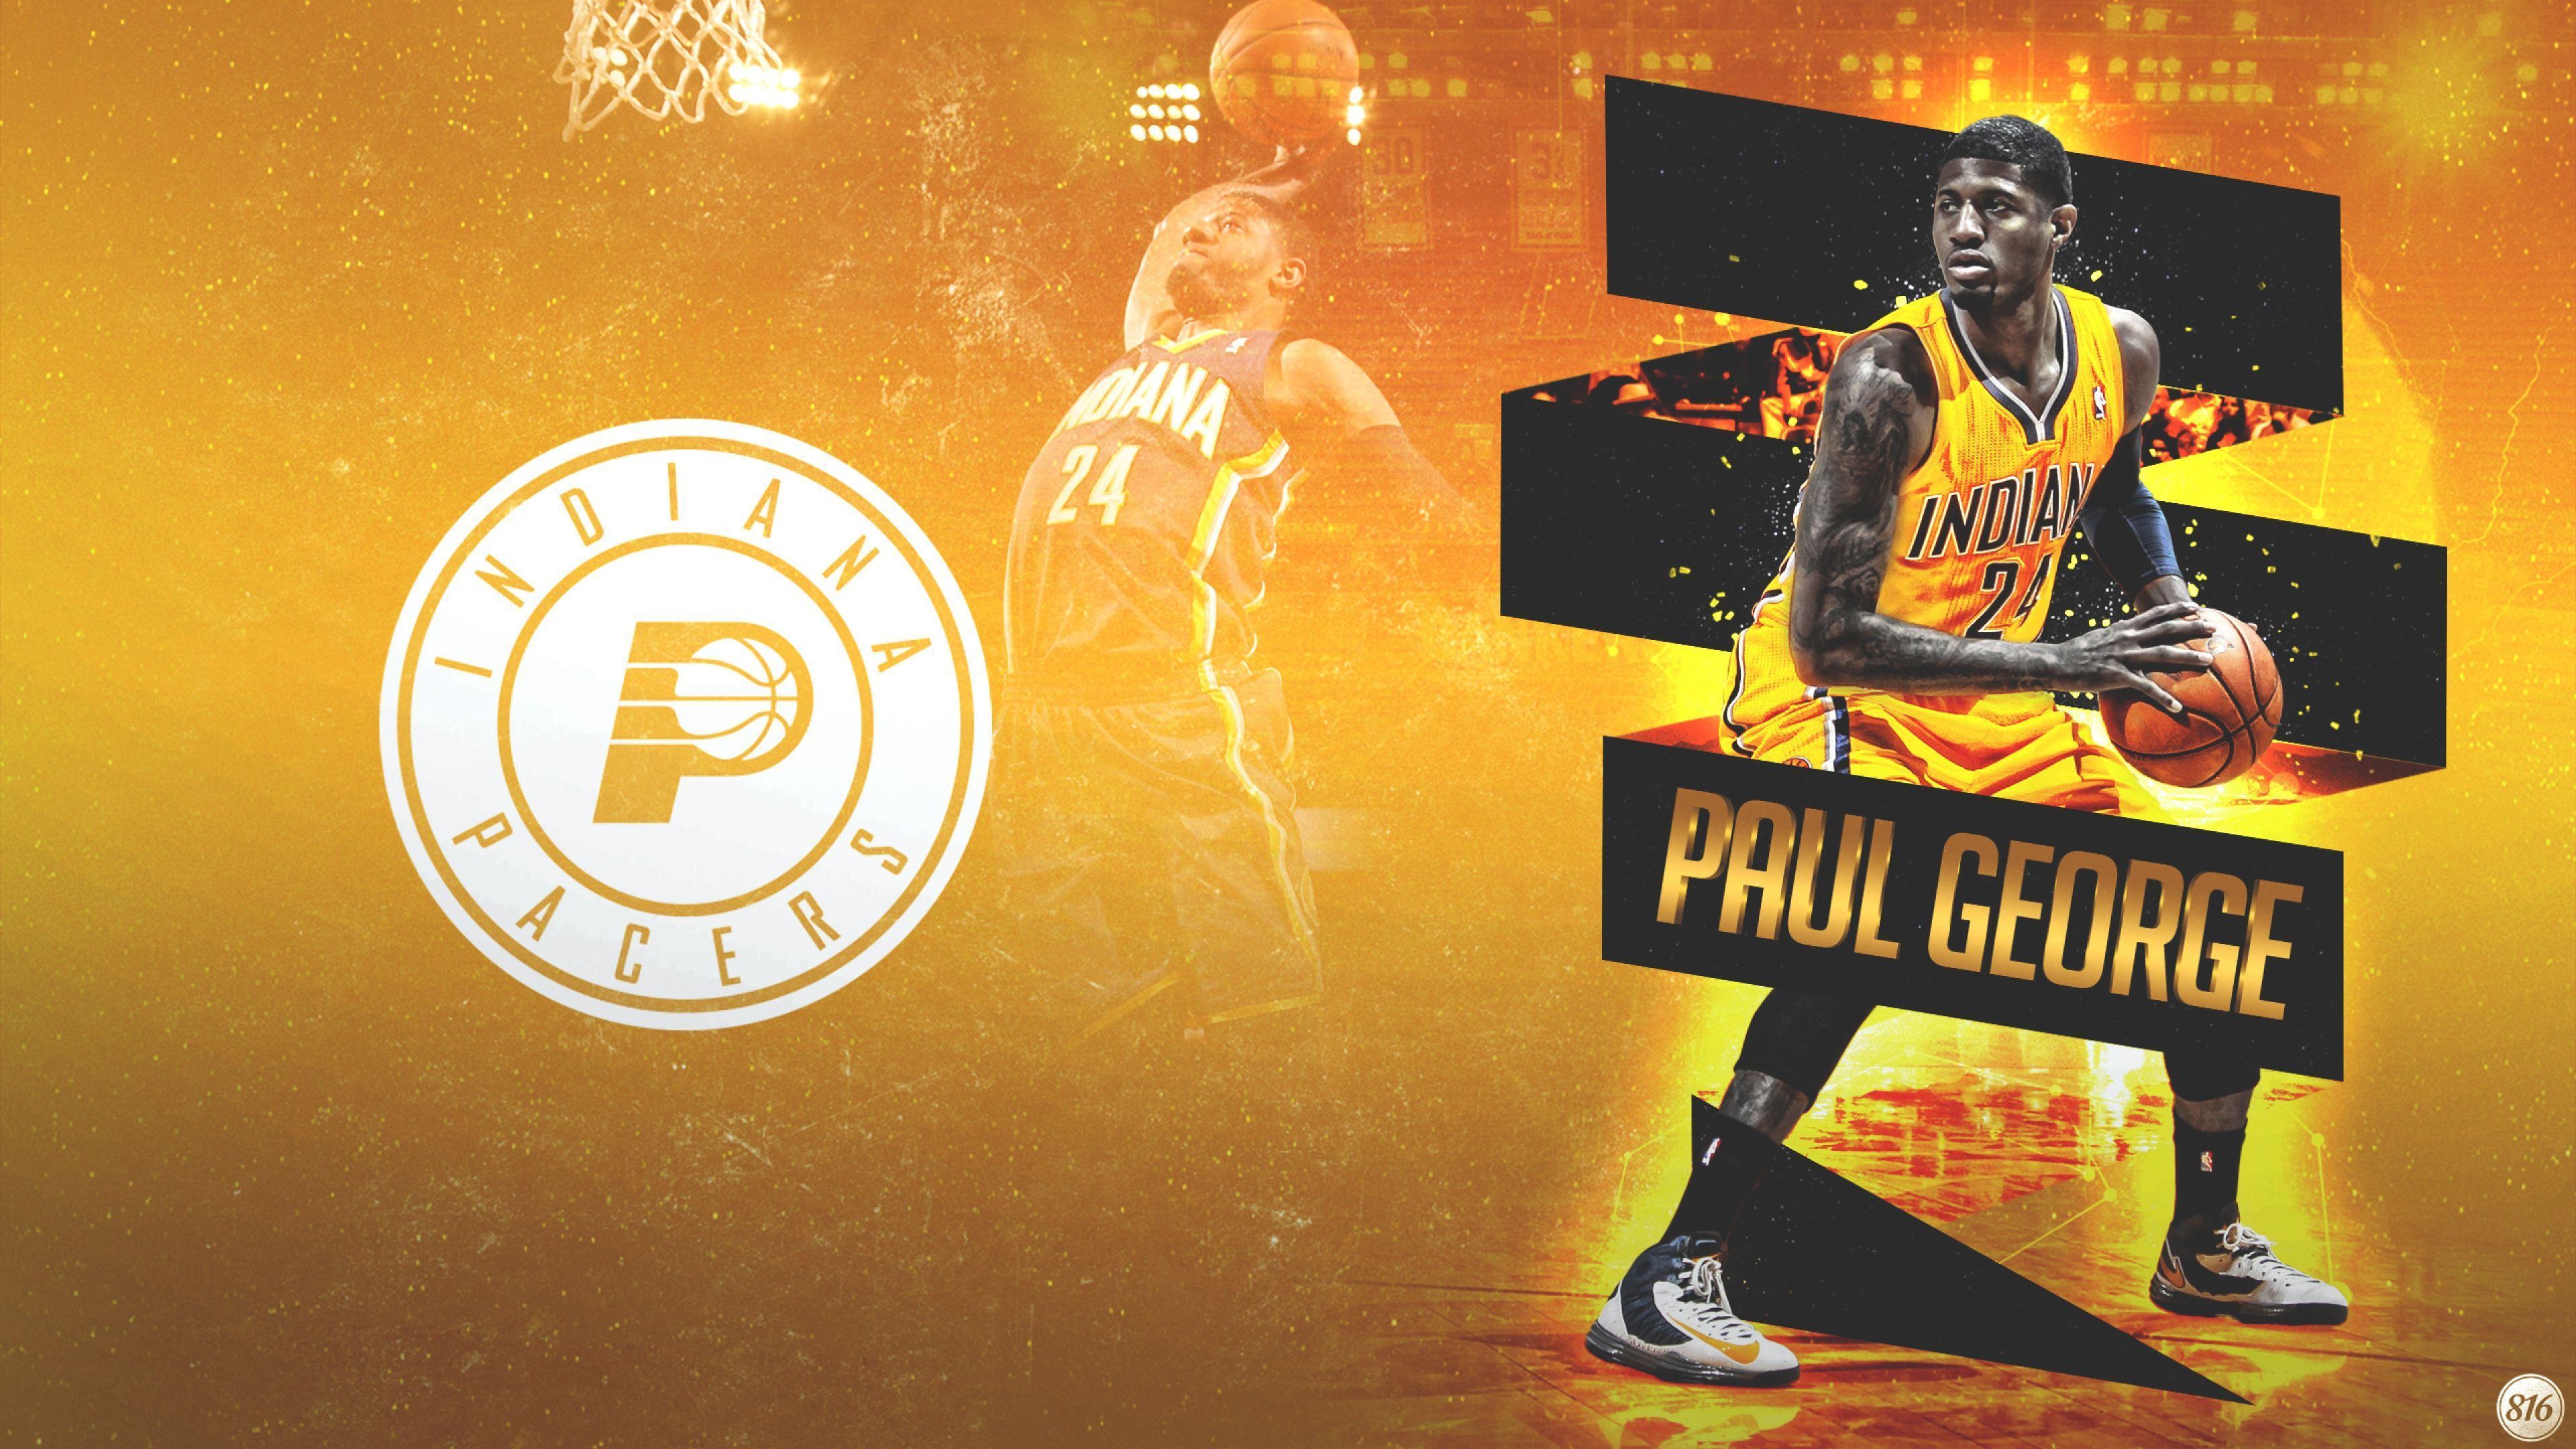 Download Wallpaper 3840x2160 Paul george, Indiana, Pacers